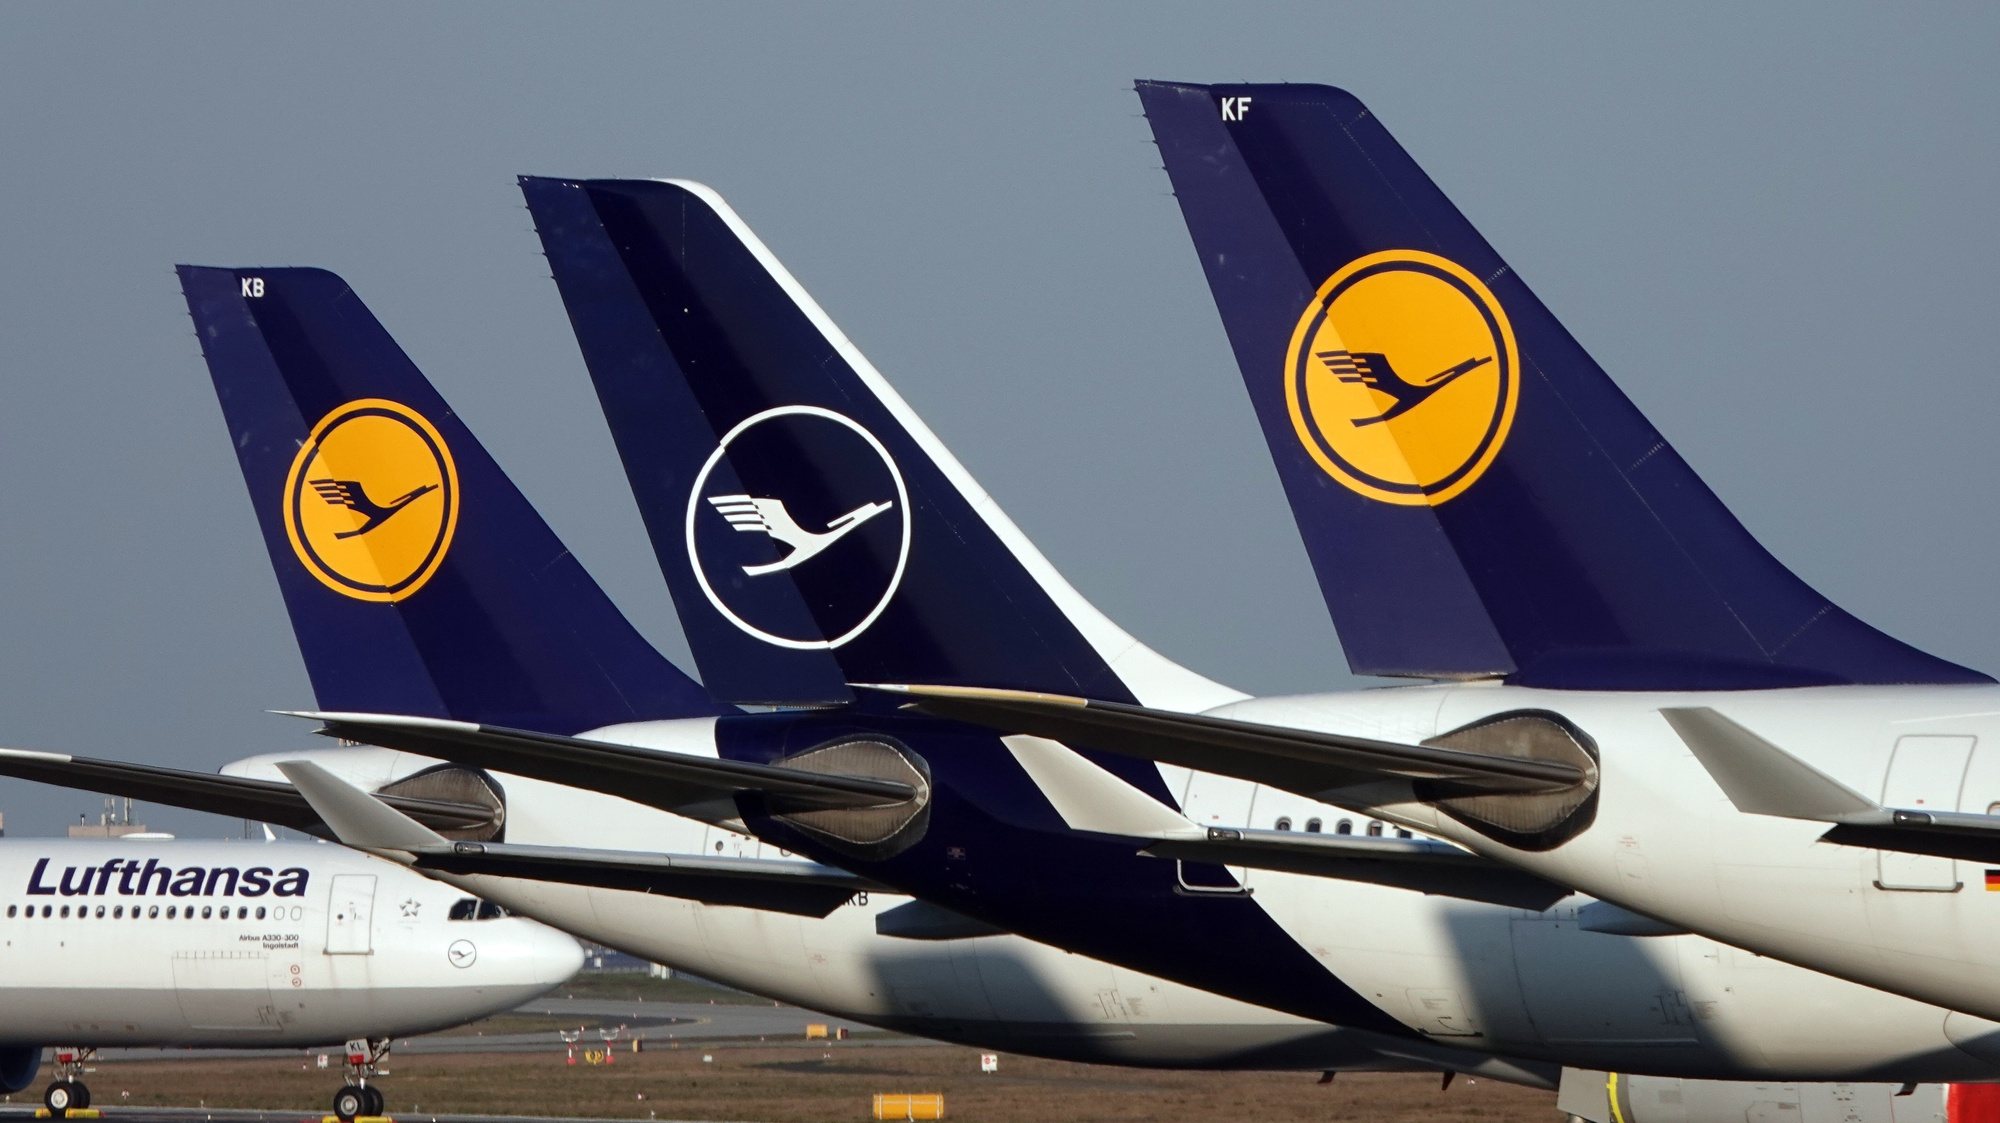 epa09050635 (FILE) Lufthansa passenger planes parked at Frankfurt airport&#039;s northern runway in Frankfurt, Germany, 25 March 2020 (reissued 04 March 2021). Lufthansa Group in a statement on 04 March 2021 reported a 5.5 billion euro operating loss in 2020, mostly due to the ongoing coronavirus Covid-19 pandemic.  EPA/MAURITZ ANTIN *** Local Caption *** 56475375